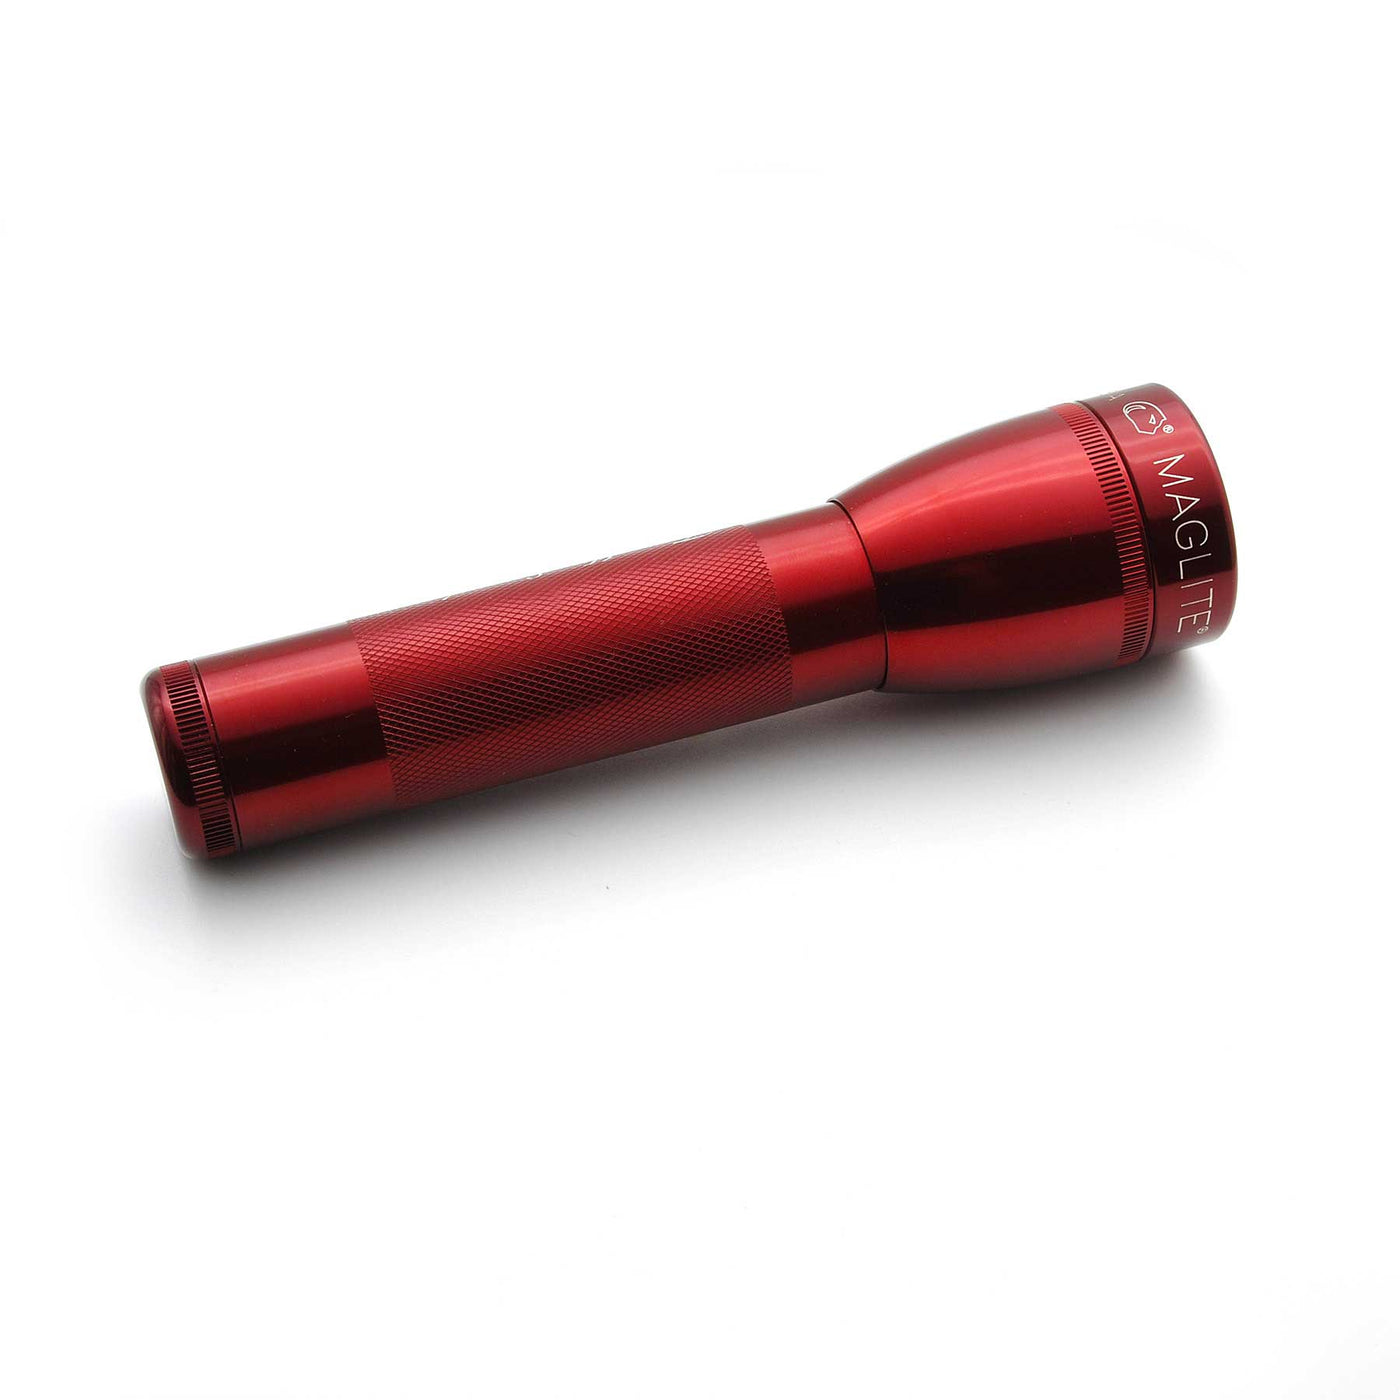 ML25LT LED - For My Sweetheart - 2-Cell C Flashlight Red